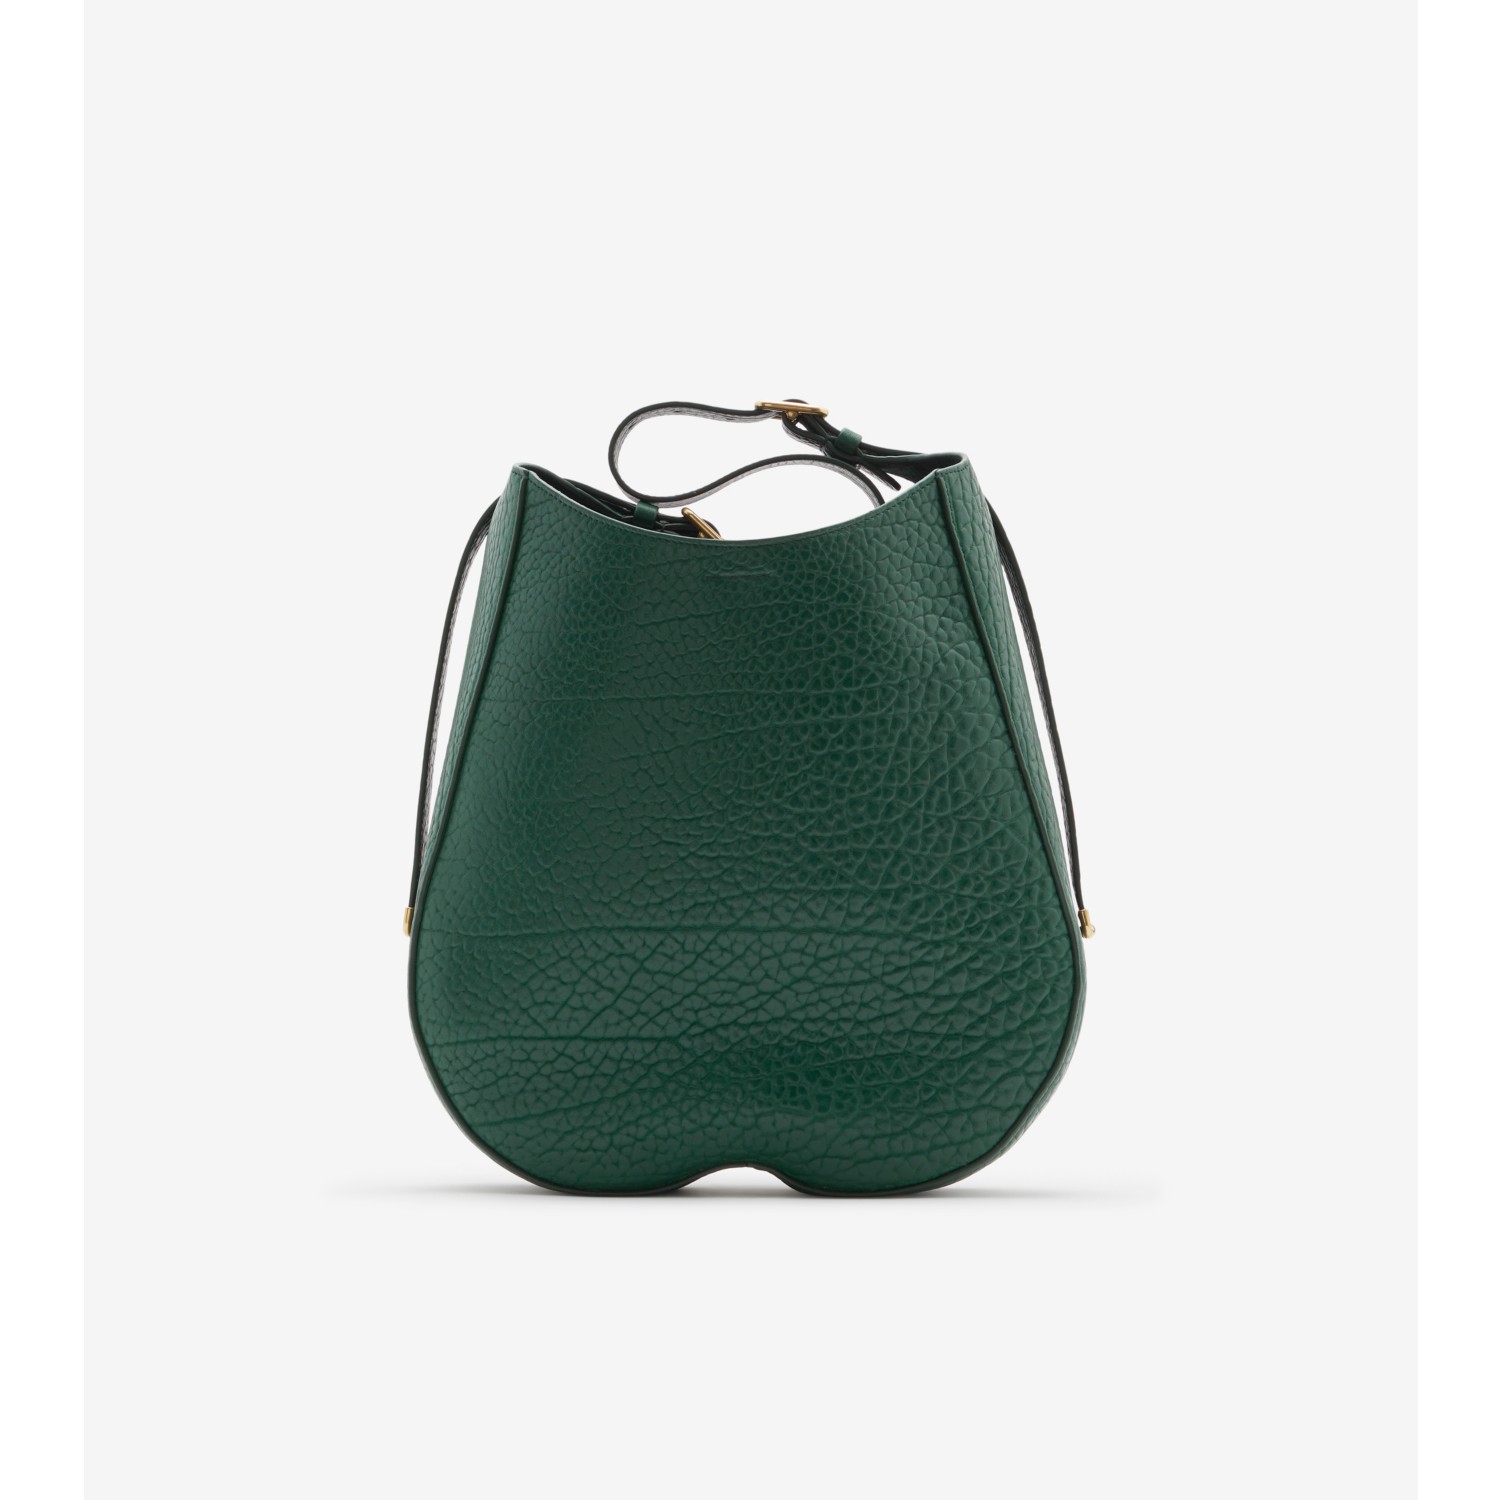 Leather Shoulder Bag With Metal Charm by Burberry in Green color